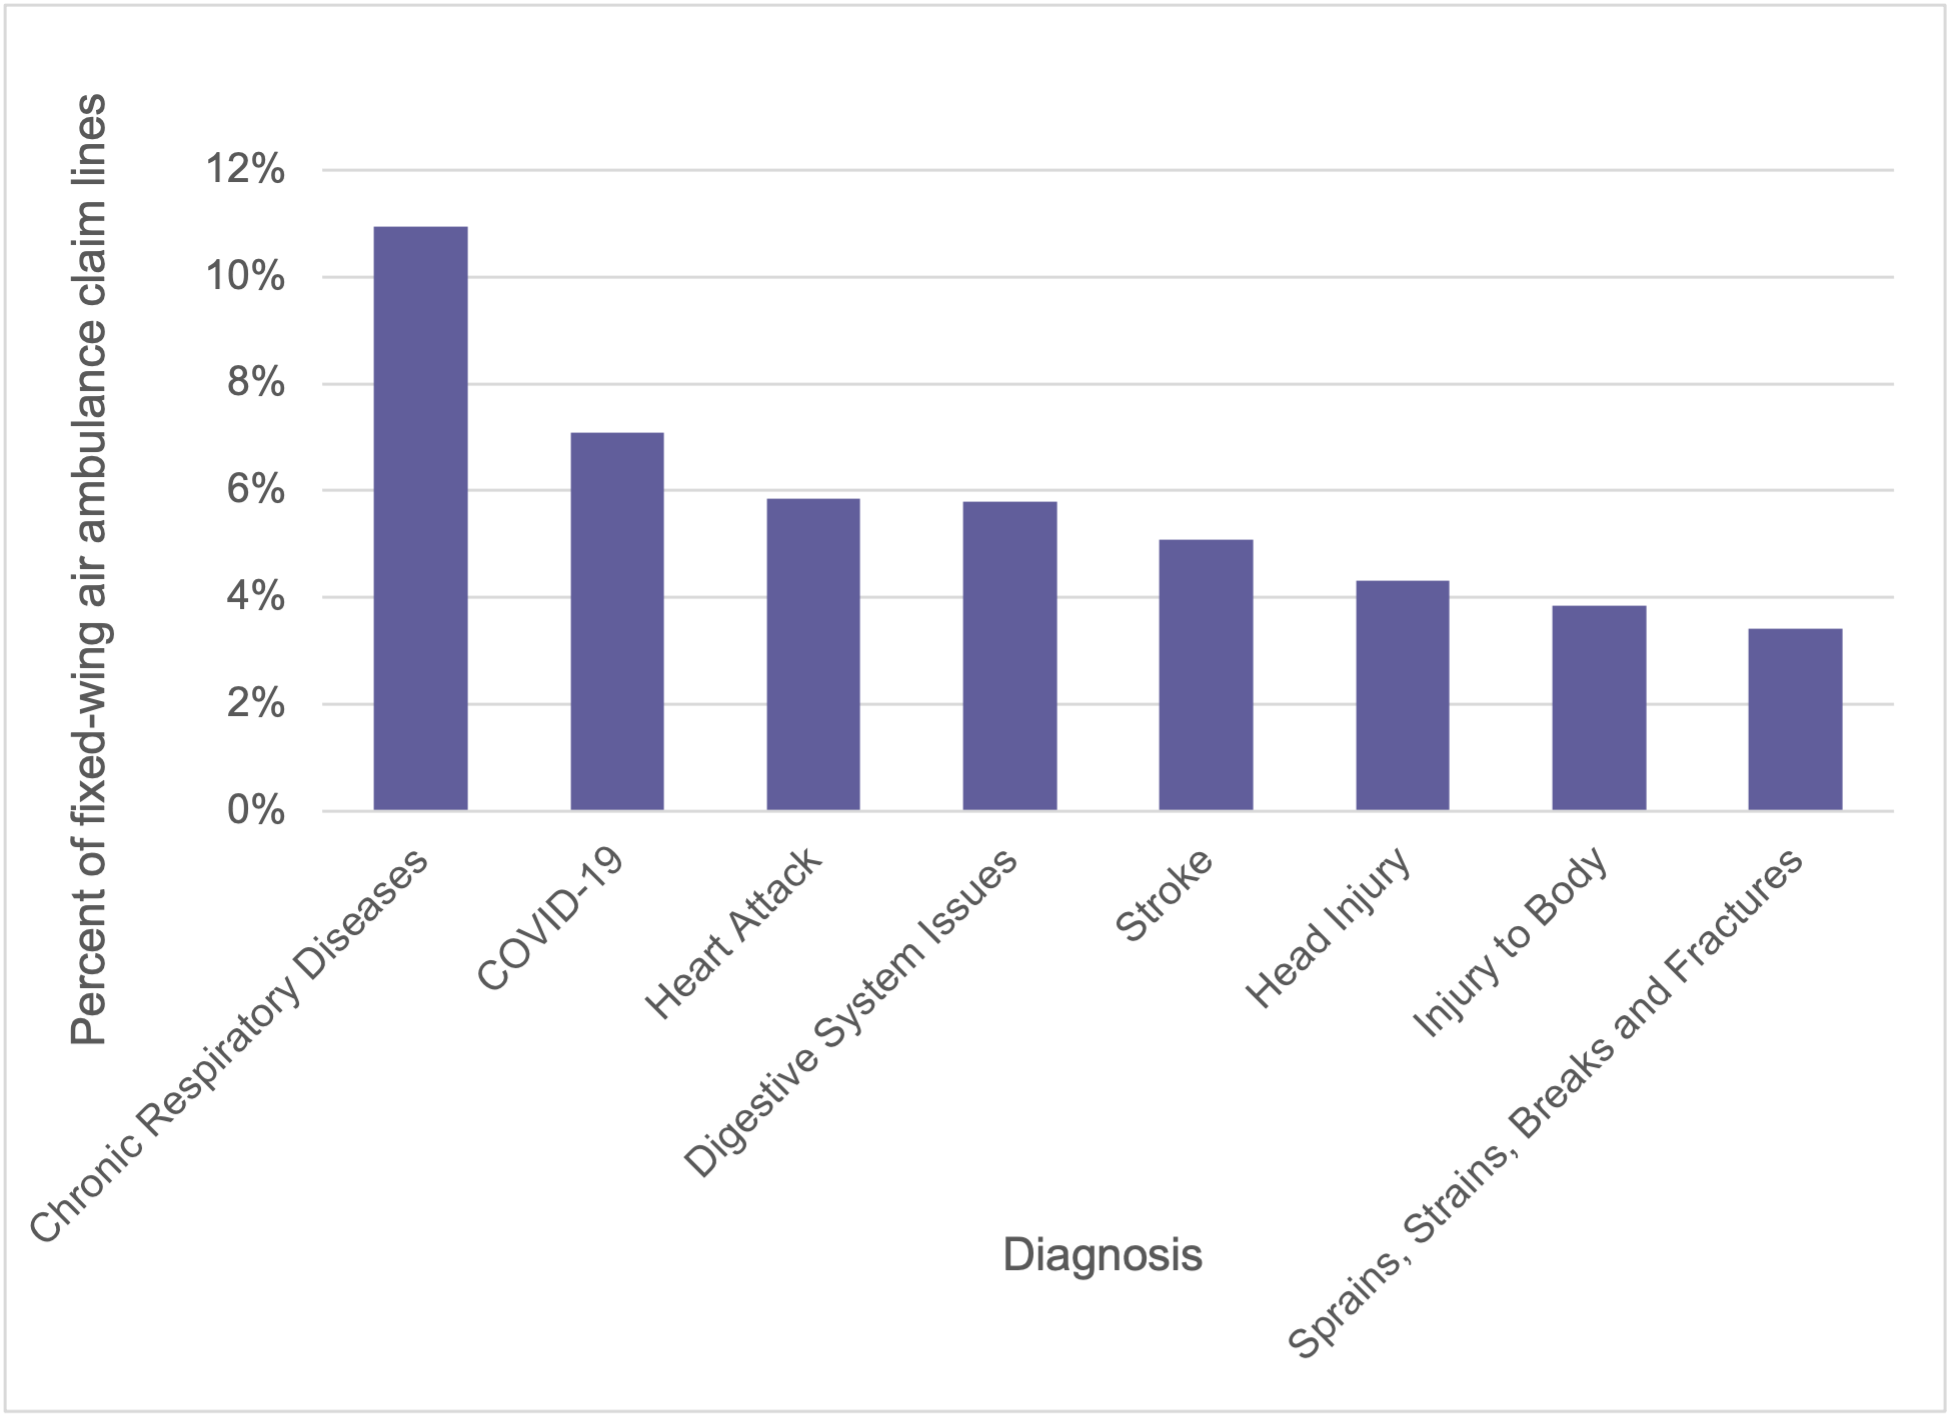 Exhibit 2. Most Common Diagnoses Associated with Fixed-Wing Air Ambulance, 2020